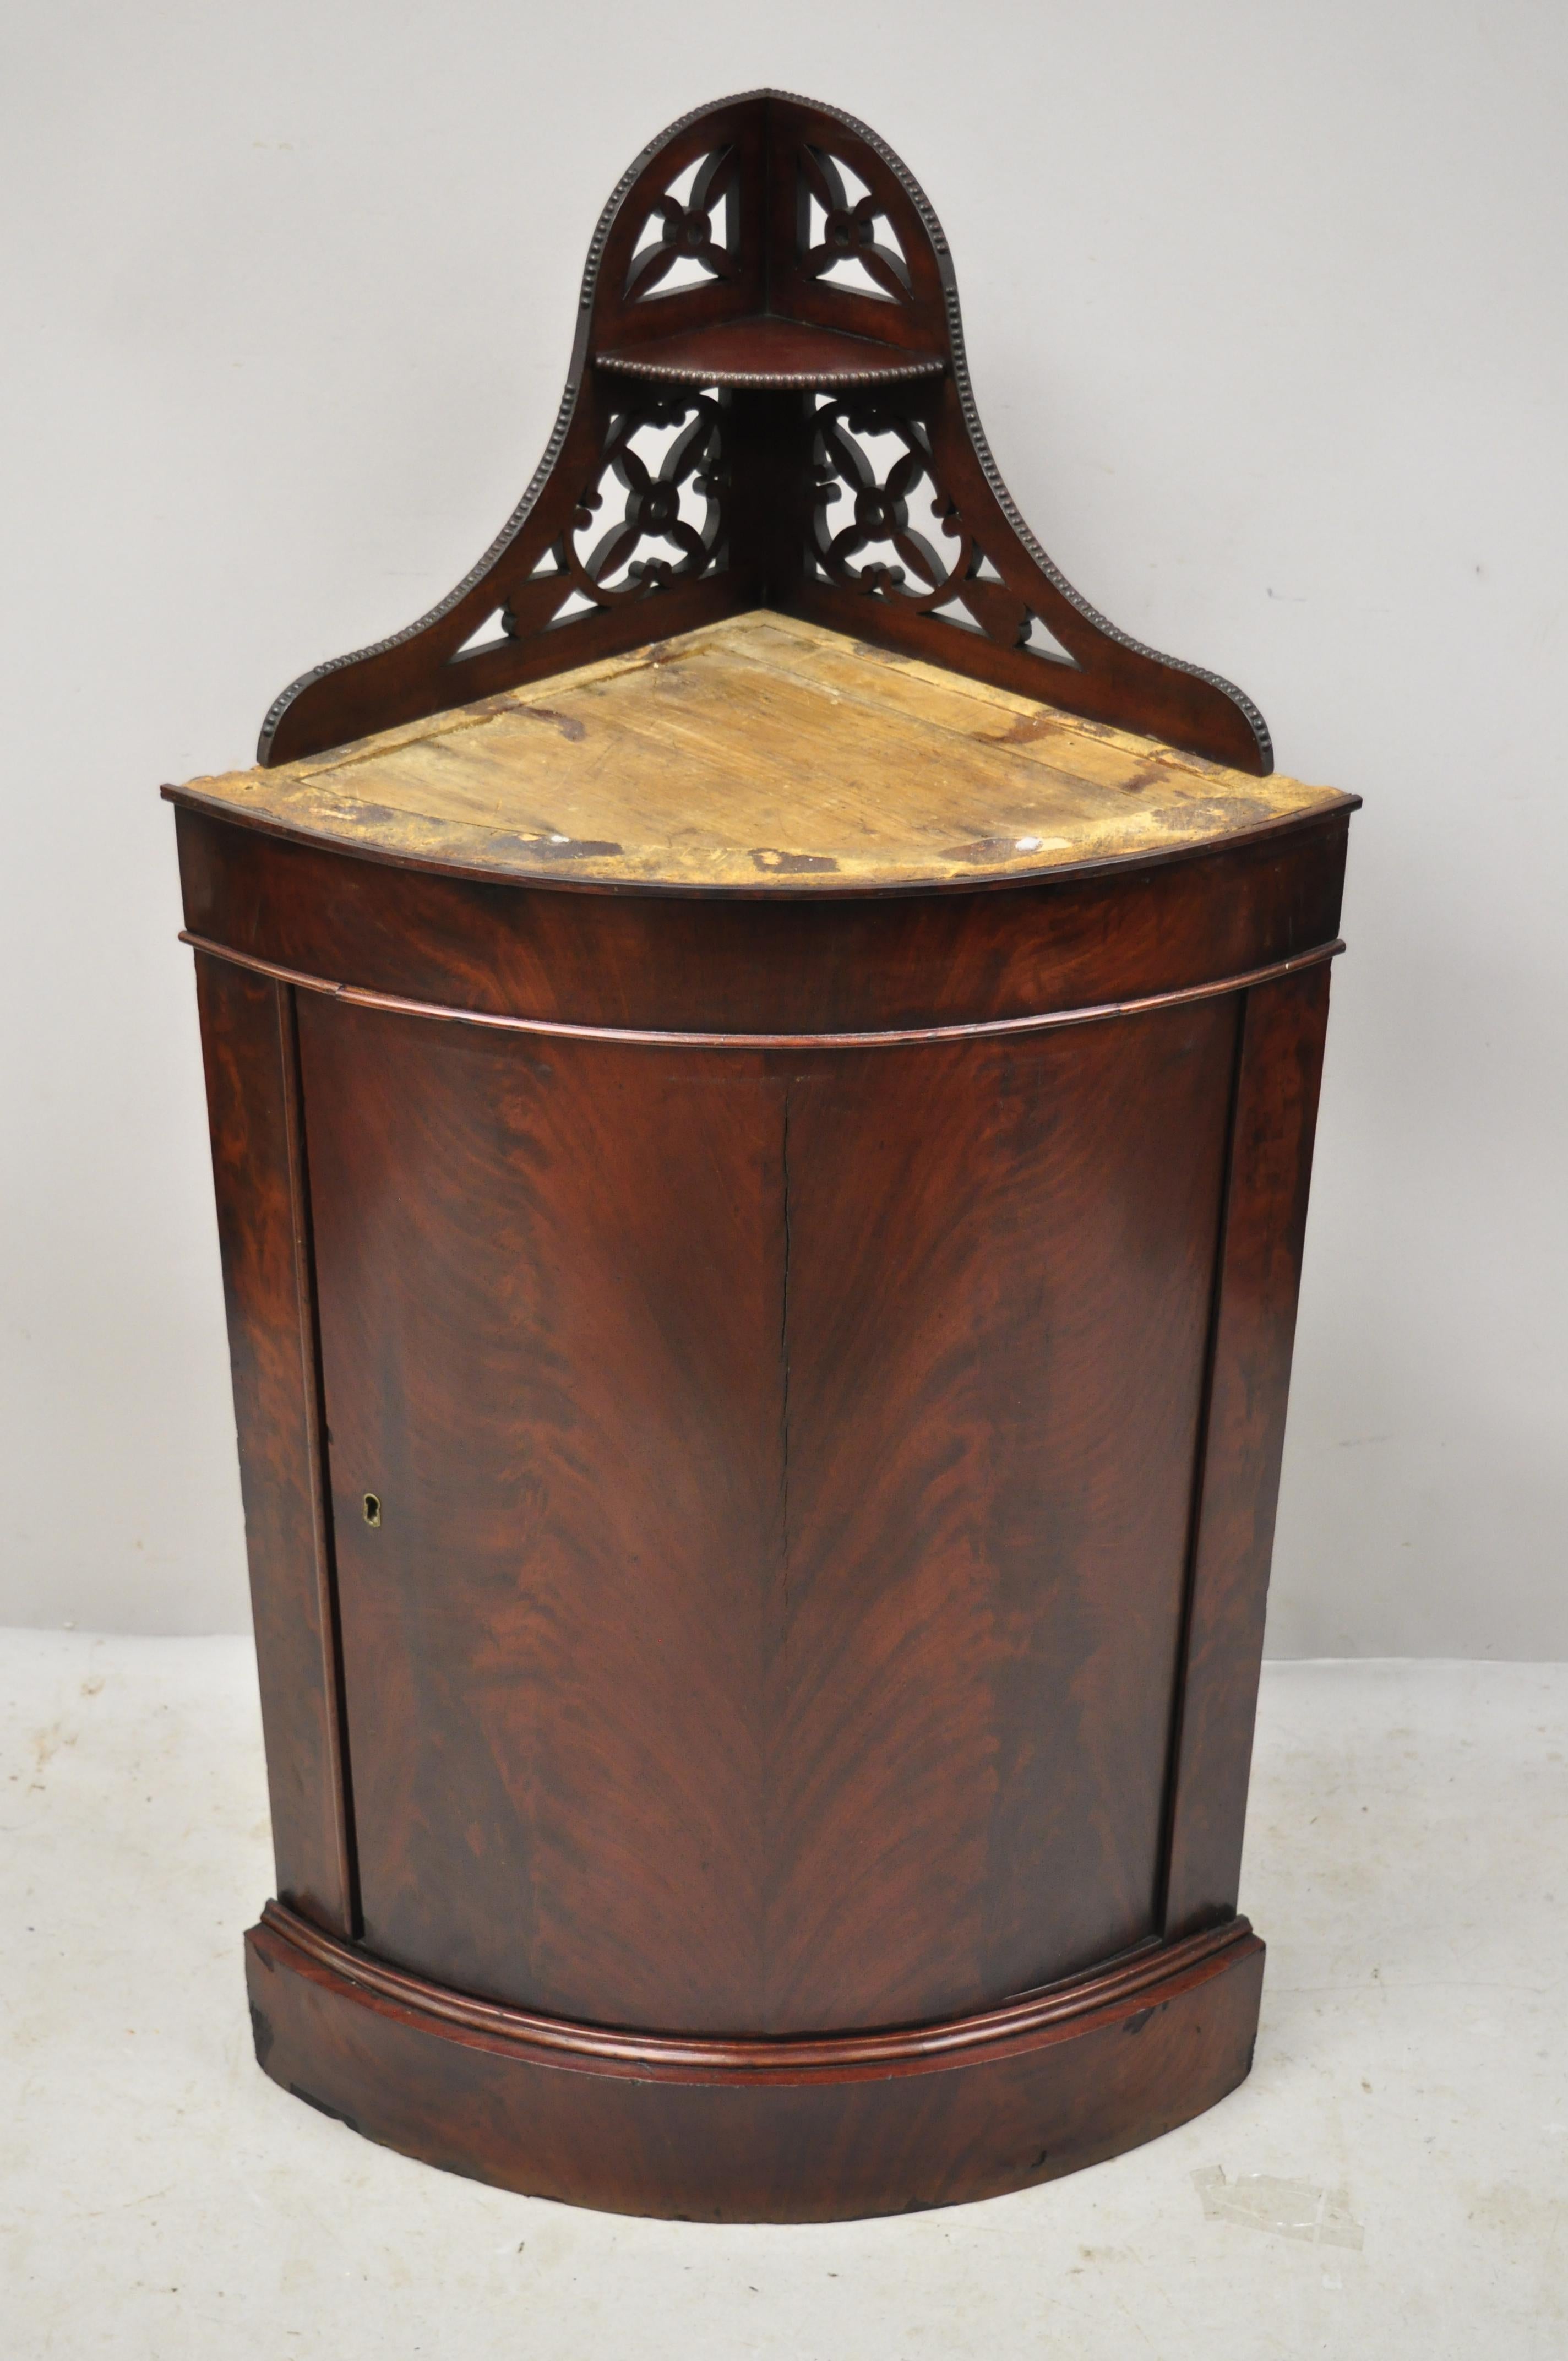 Antique Federal crotch mahogany small corner cabinet cupboard pedestal Stand. Item features beautiful wood grain, 1 swing door, no key, but unlocked, 1 wooden shelf, very nice antique item, quality American craftsmanship. Probably had a wood or